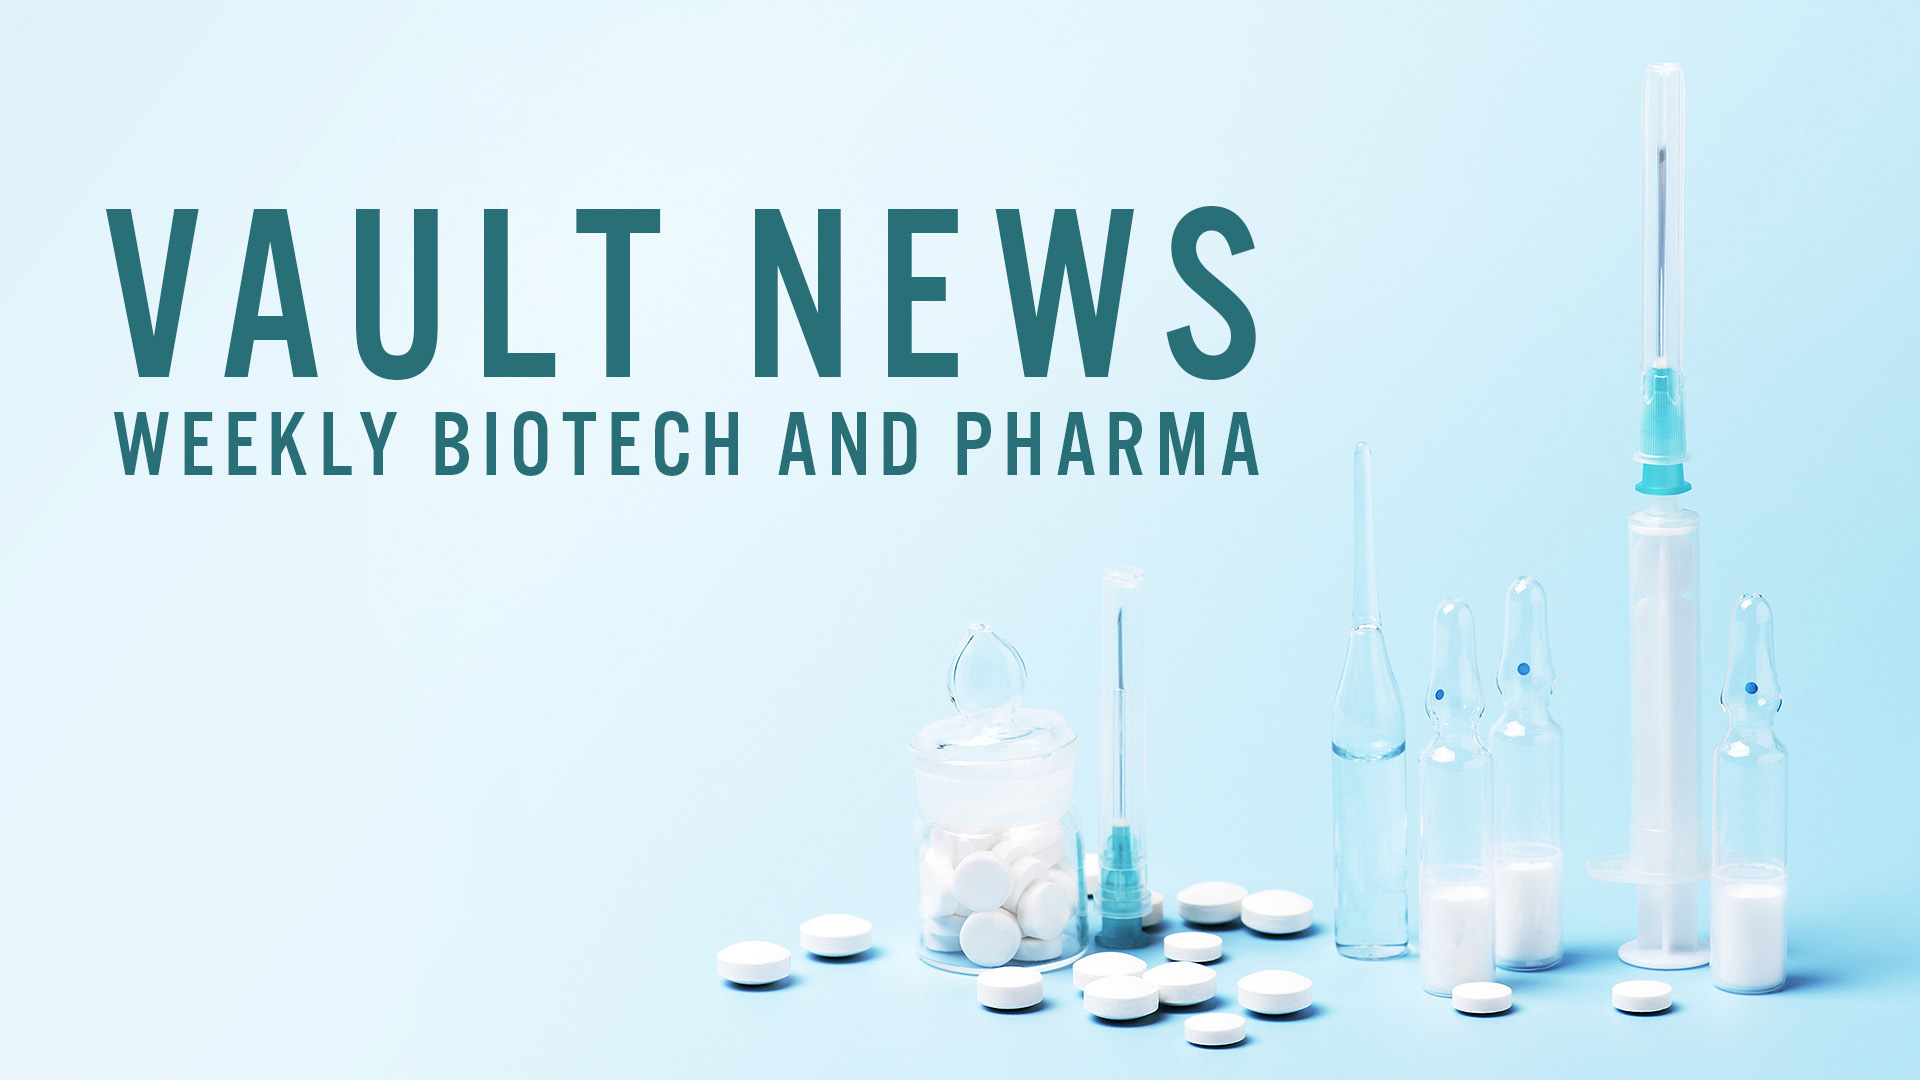 Healthcare Industry News Weekly Wrap-Up: August 11, 2022